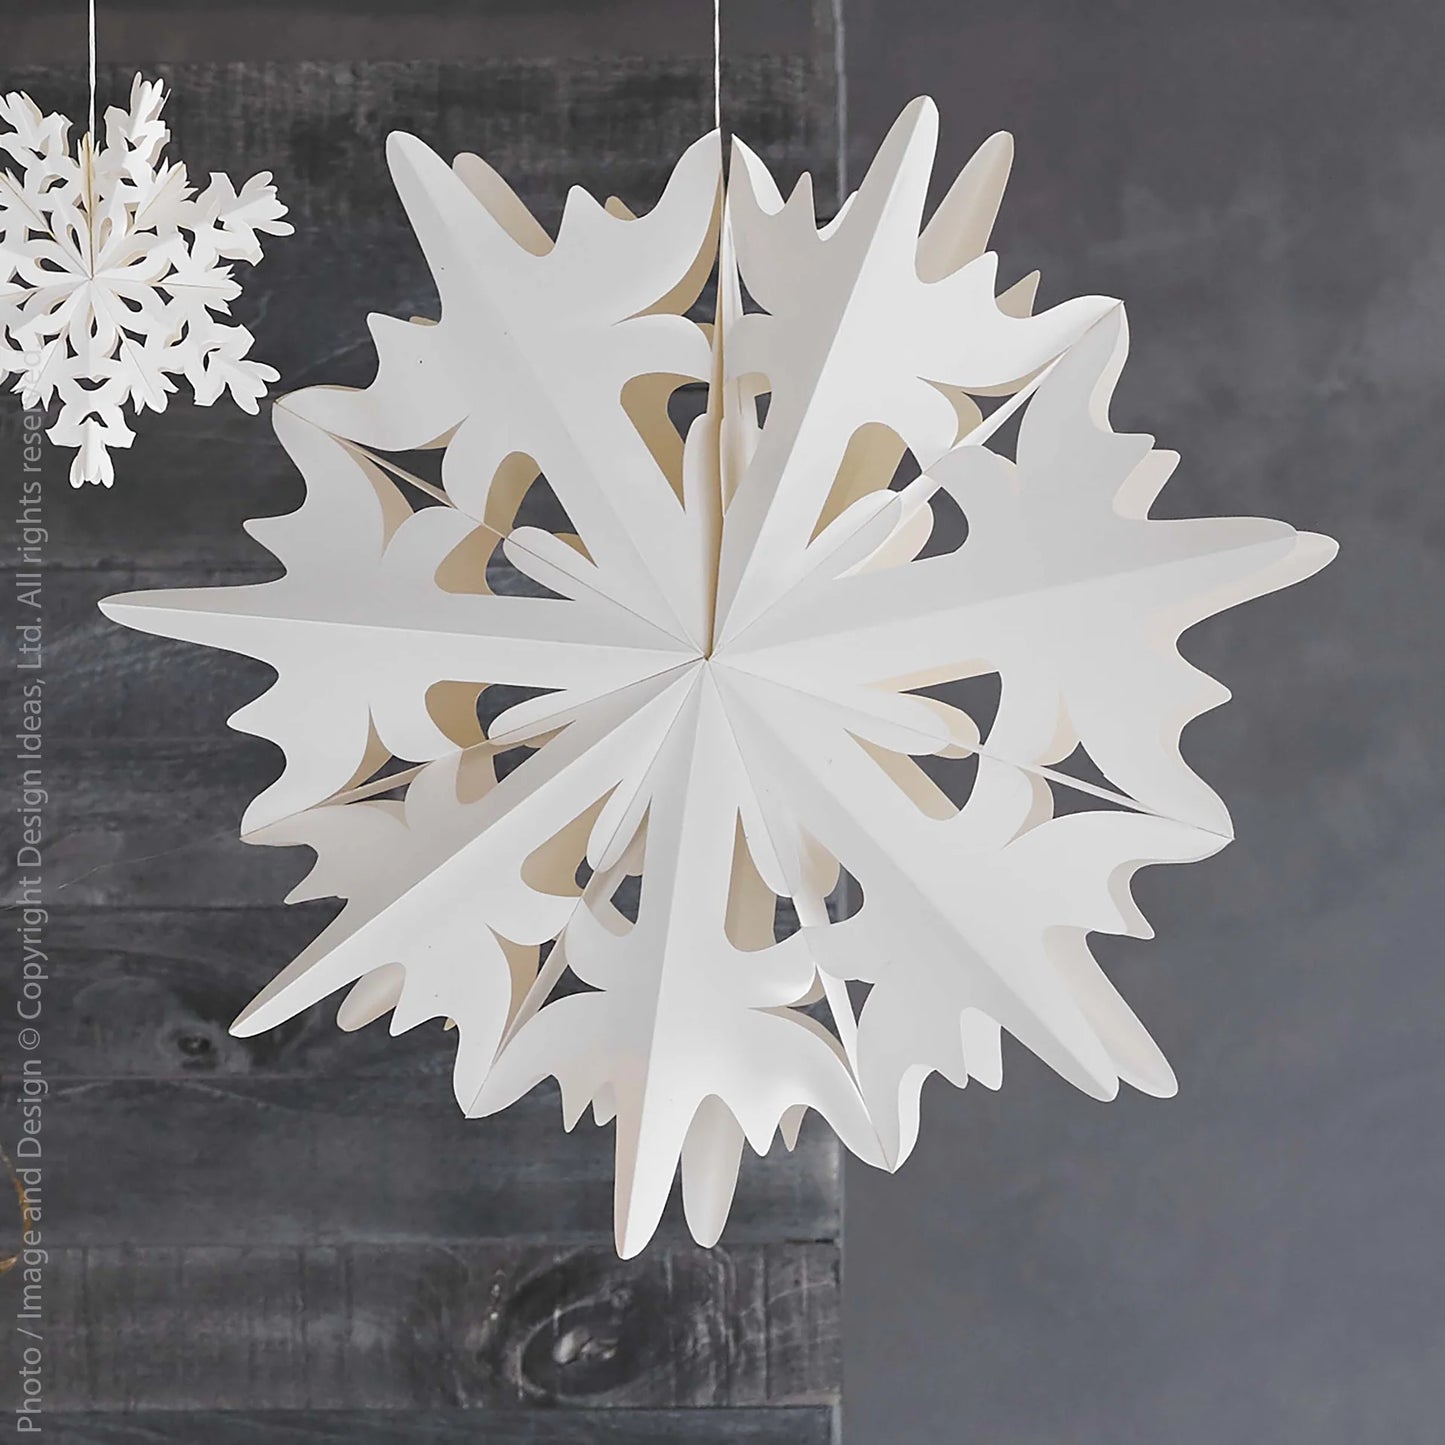 Flurry Paper Snowflakes (Large)